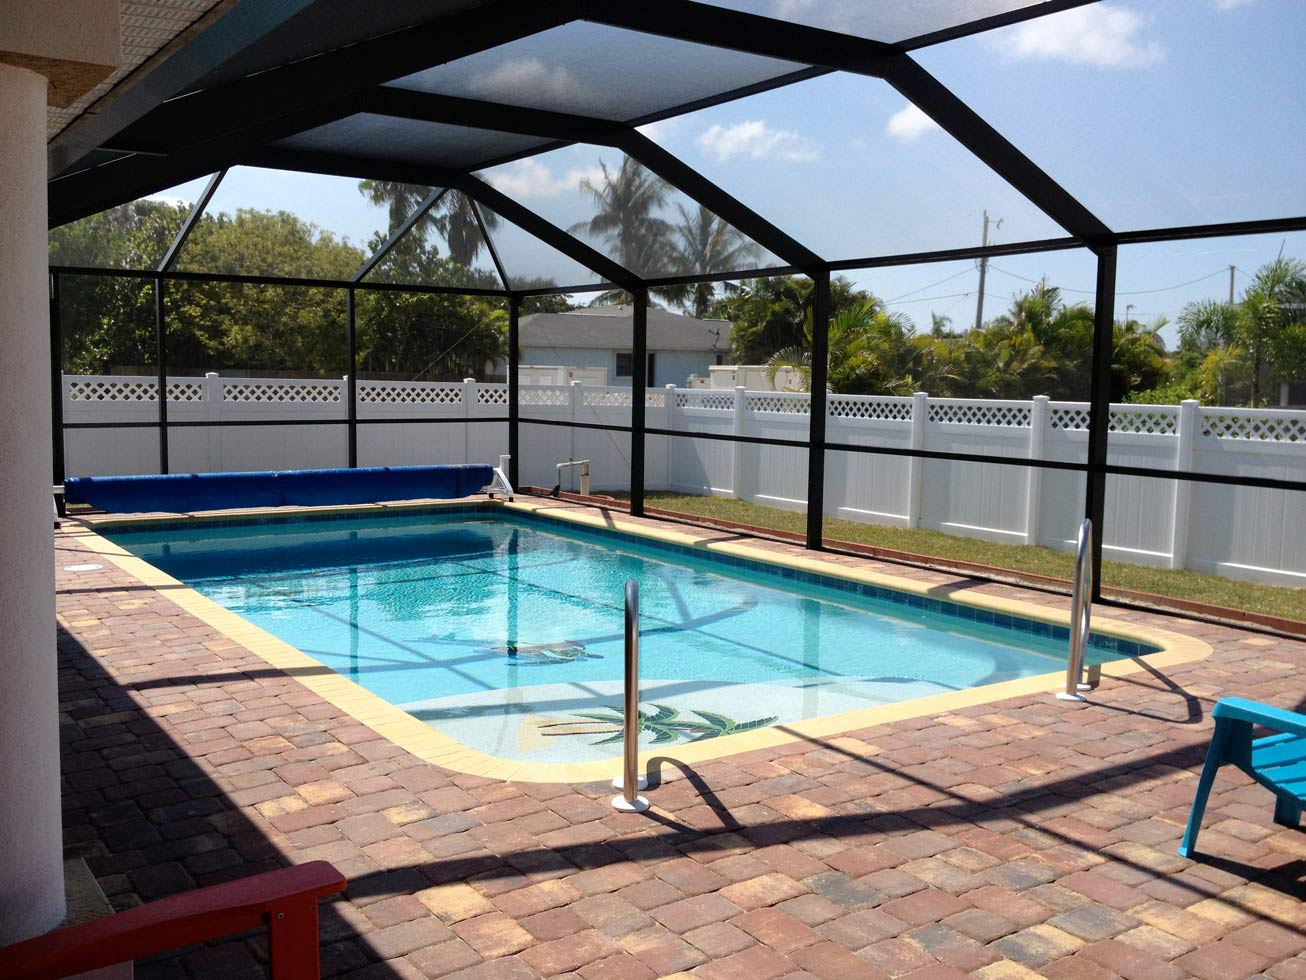 Gallery | Keller Pools | Your One-Stop Shop For All Your Pool Needs